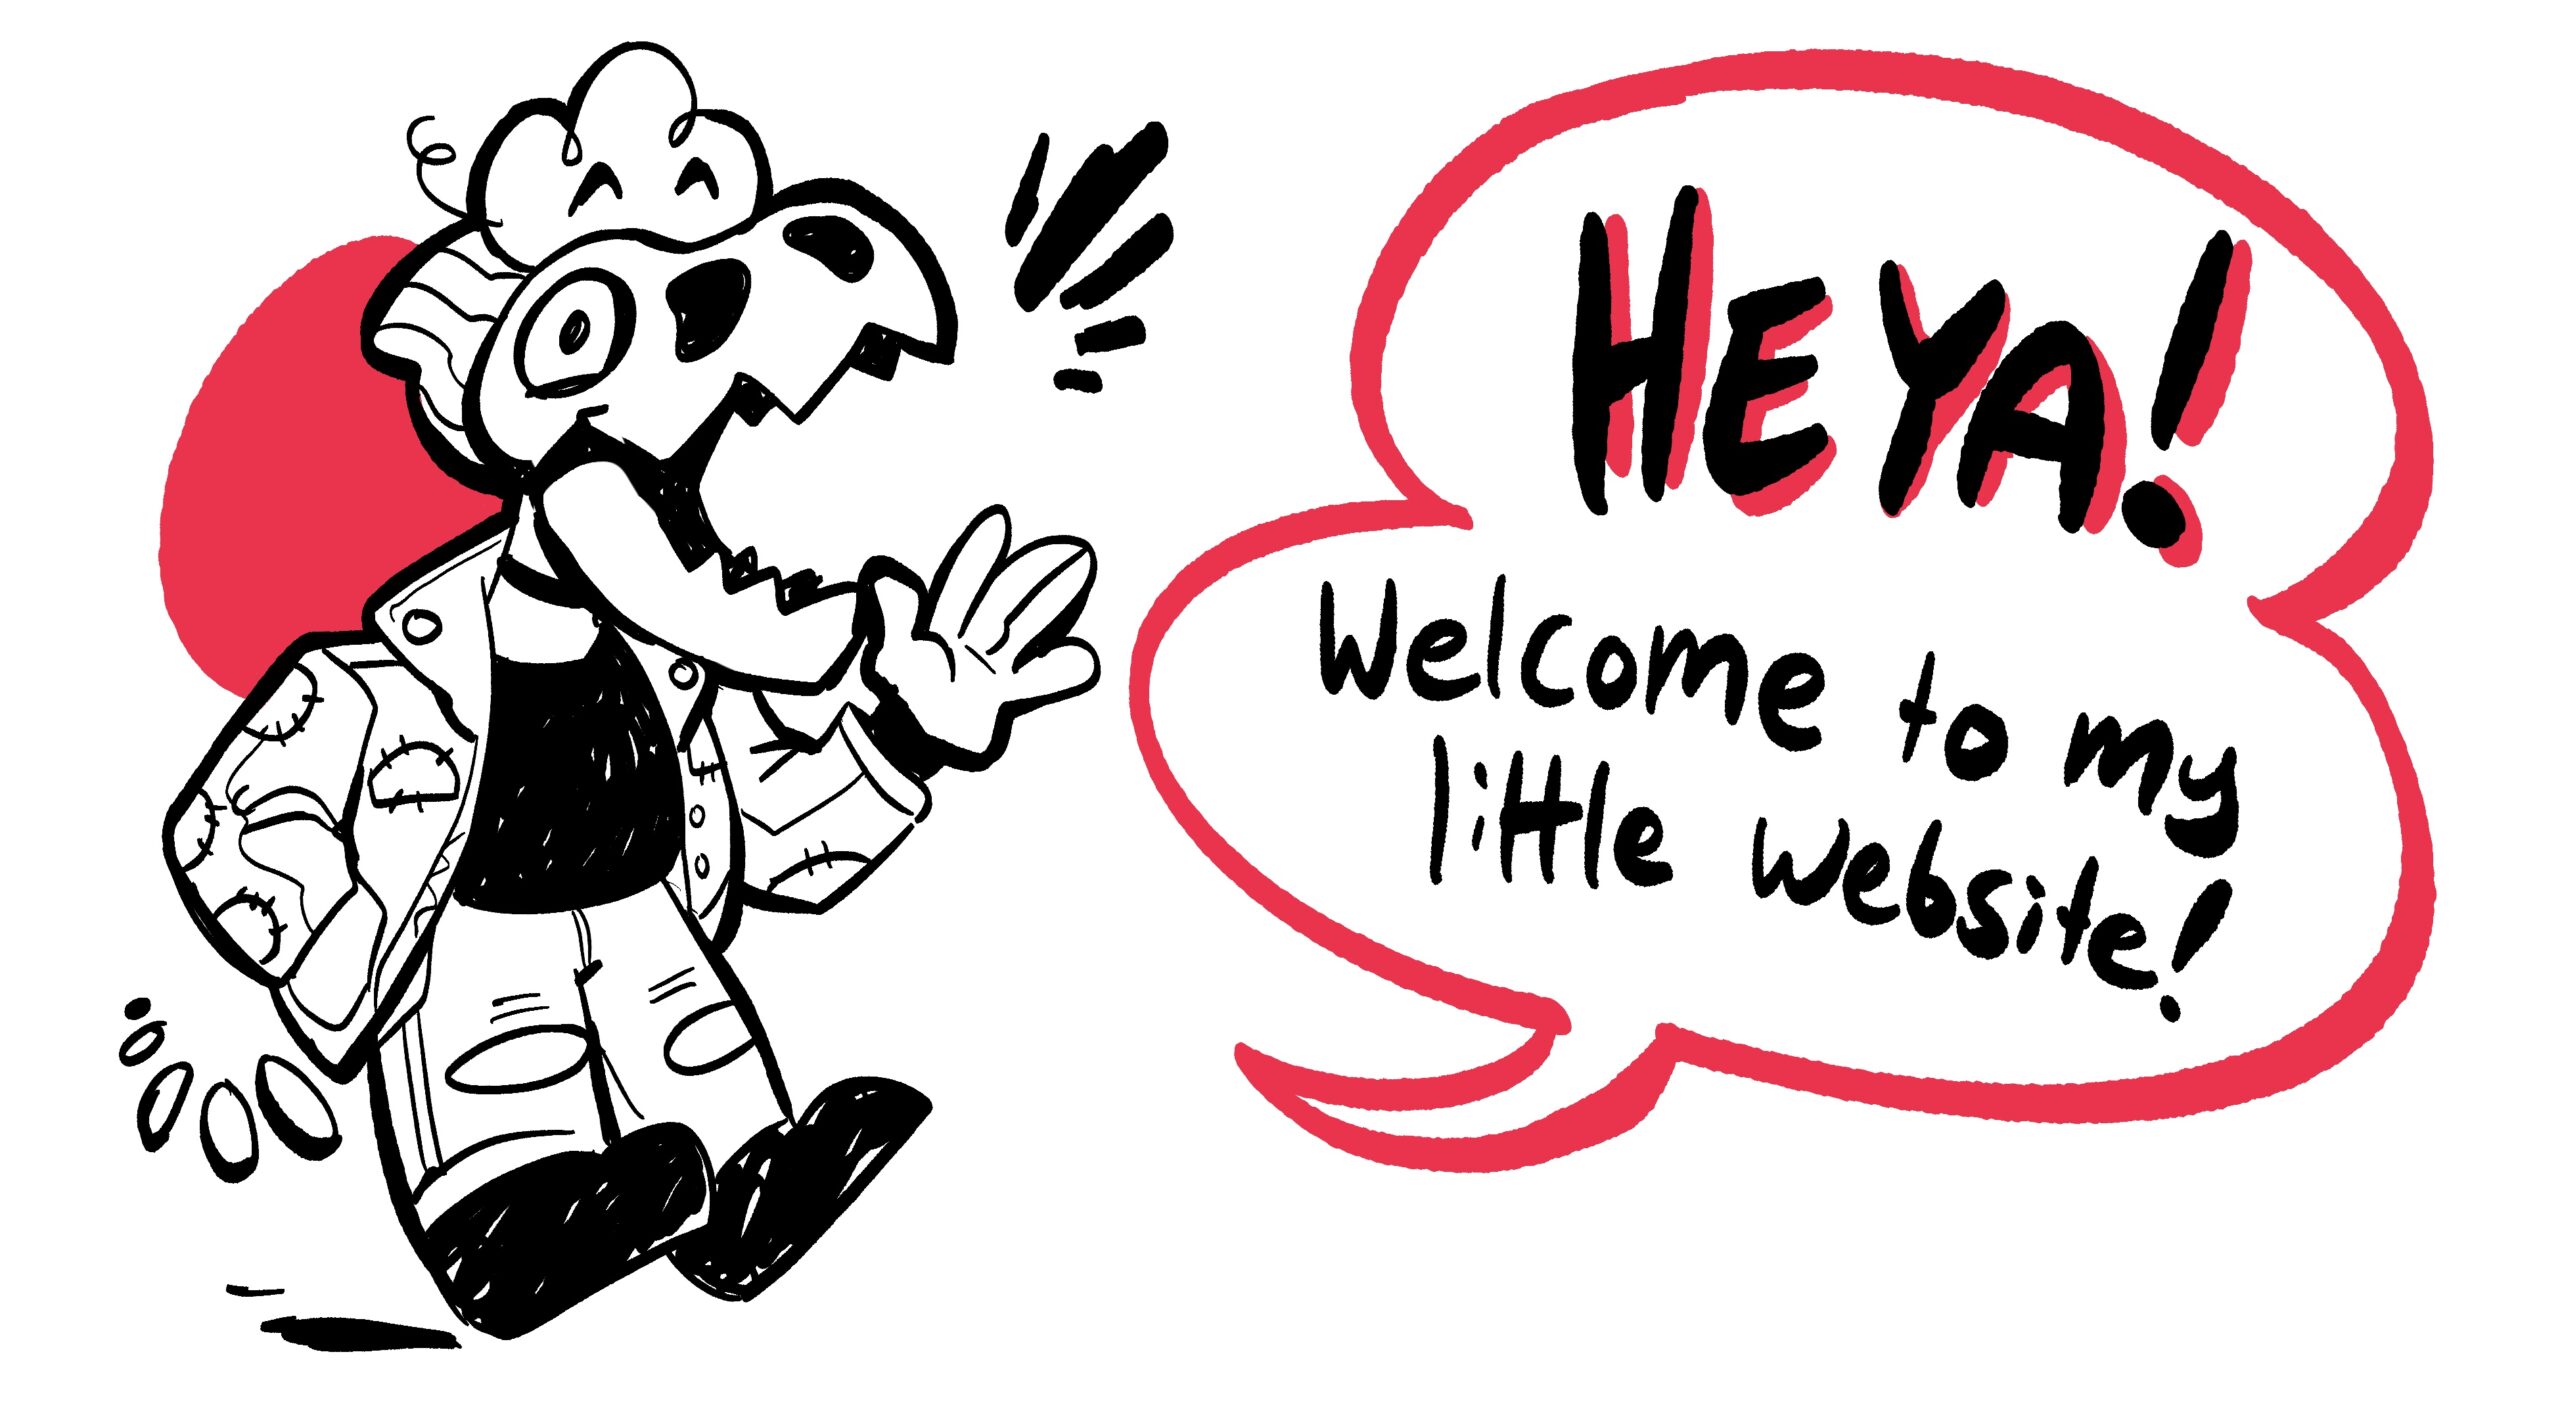 A drawing of a character with dinosaur skull saying the text: Heya! Welcome to my little website!